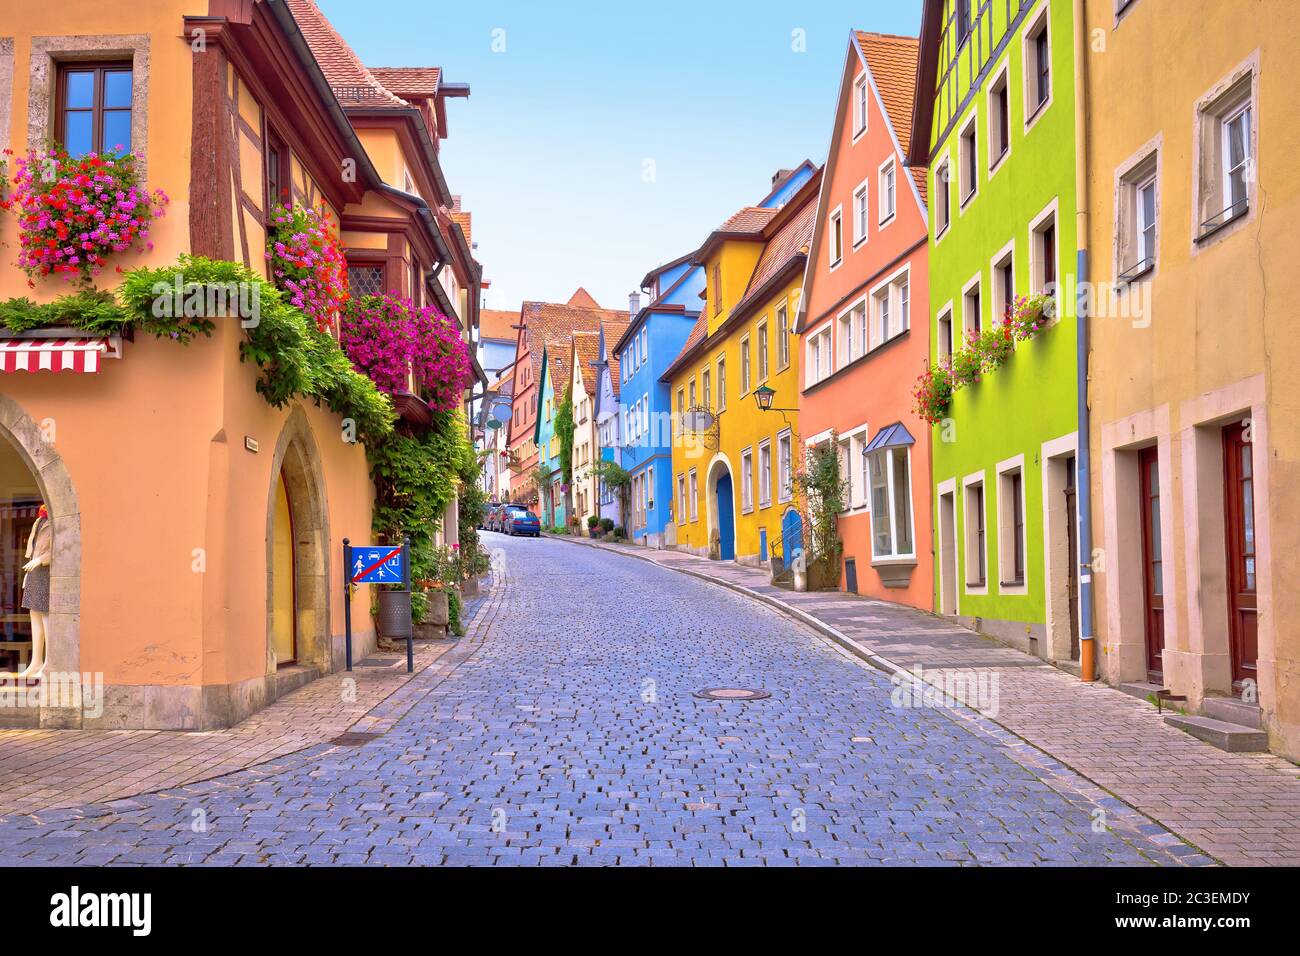 Rothenburg ob der Tauber. Cobbled colorful street and architecture of old town of Rothenburg ob der Tauber, Stock Photo